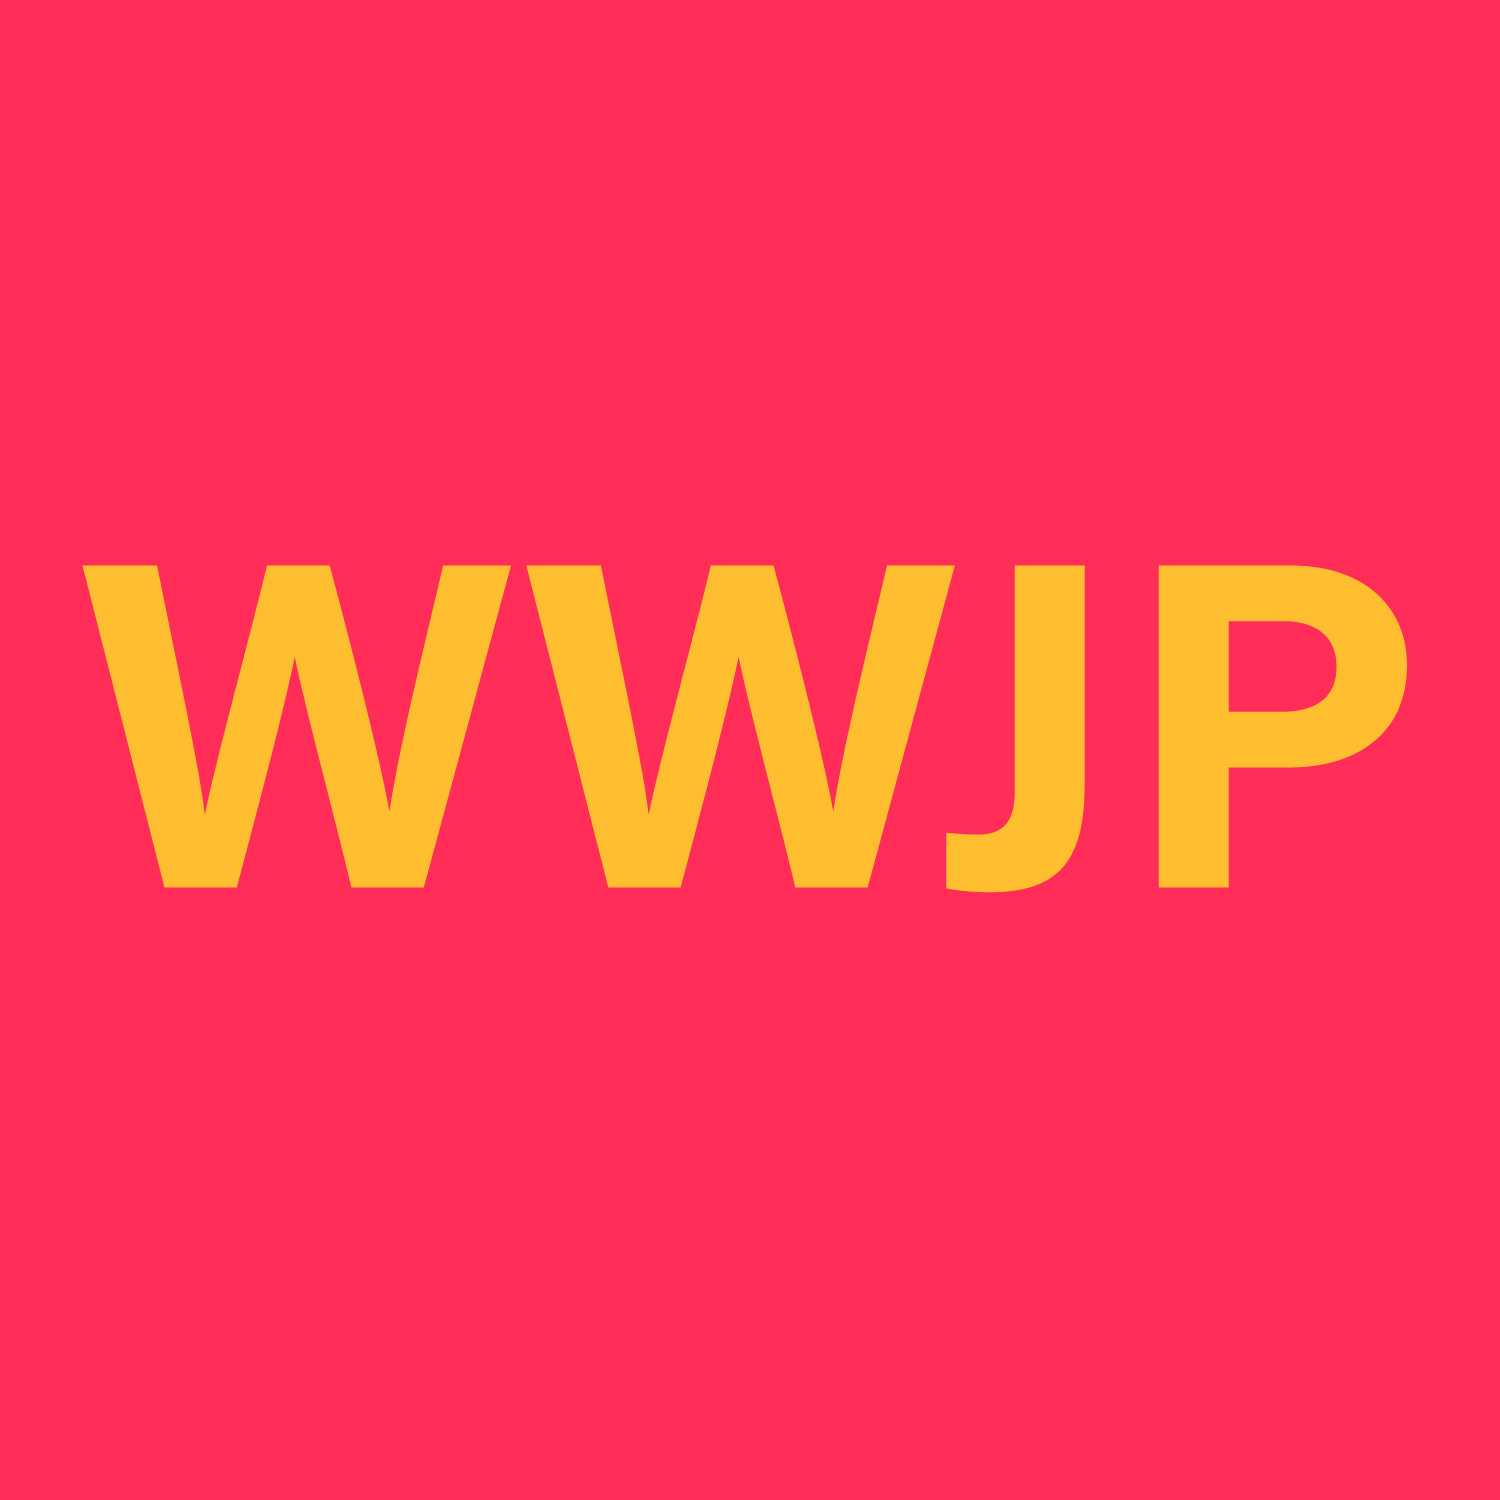 About WWJP Events